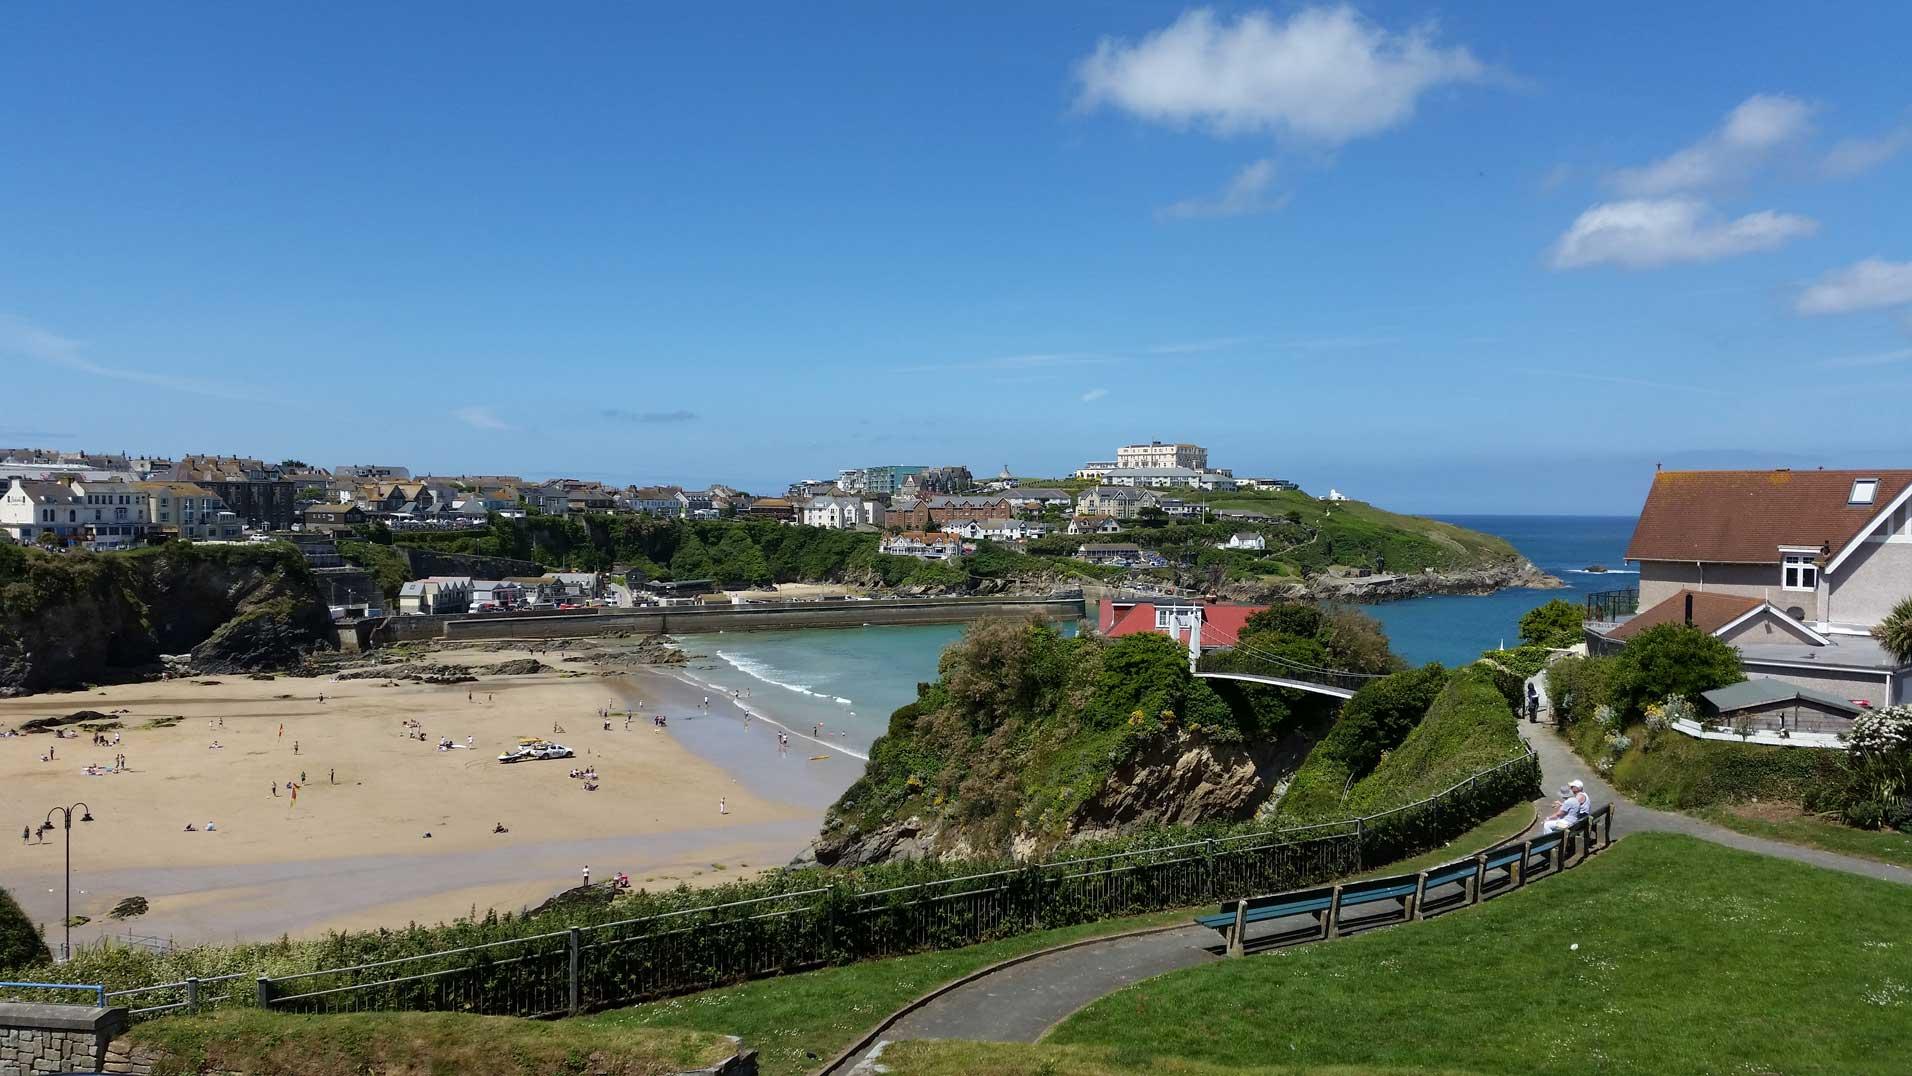 Overview of Newquay and the beach.